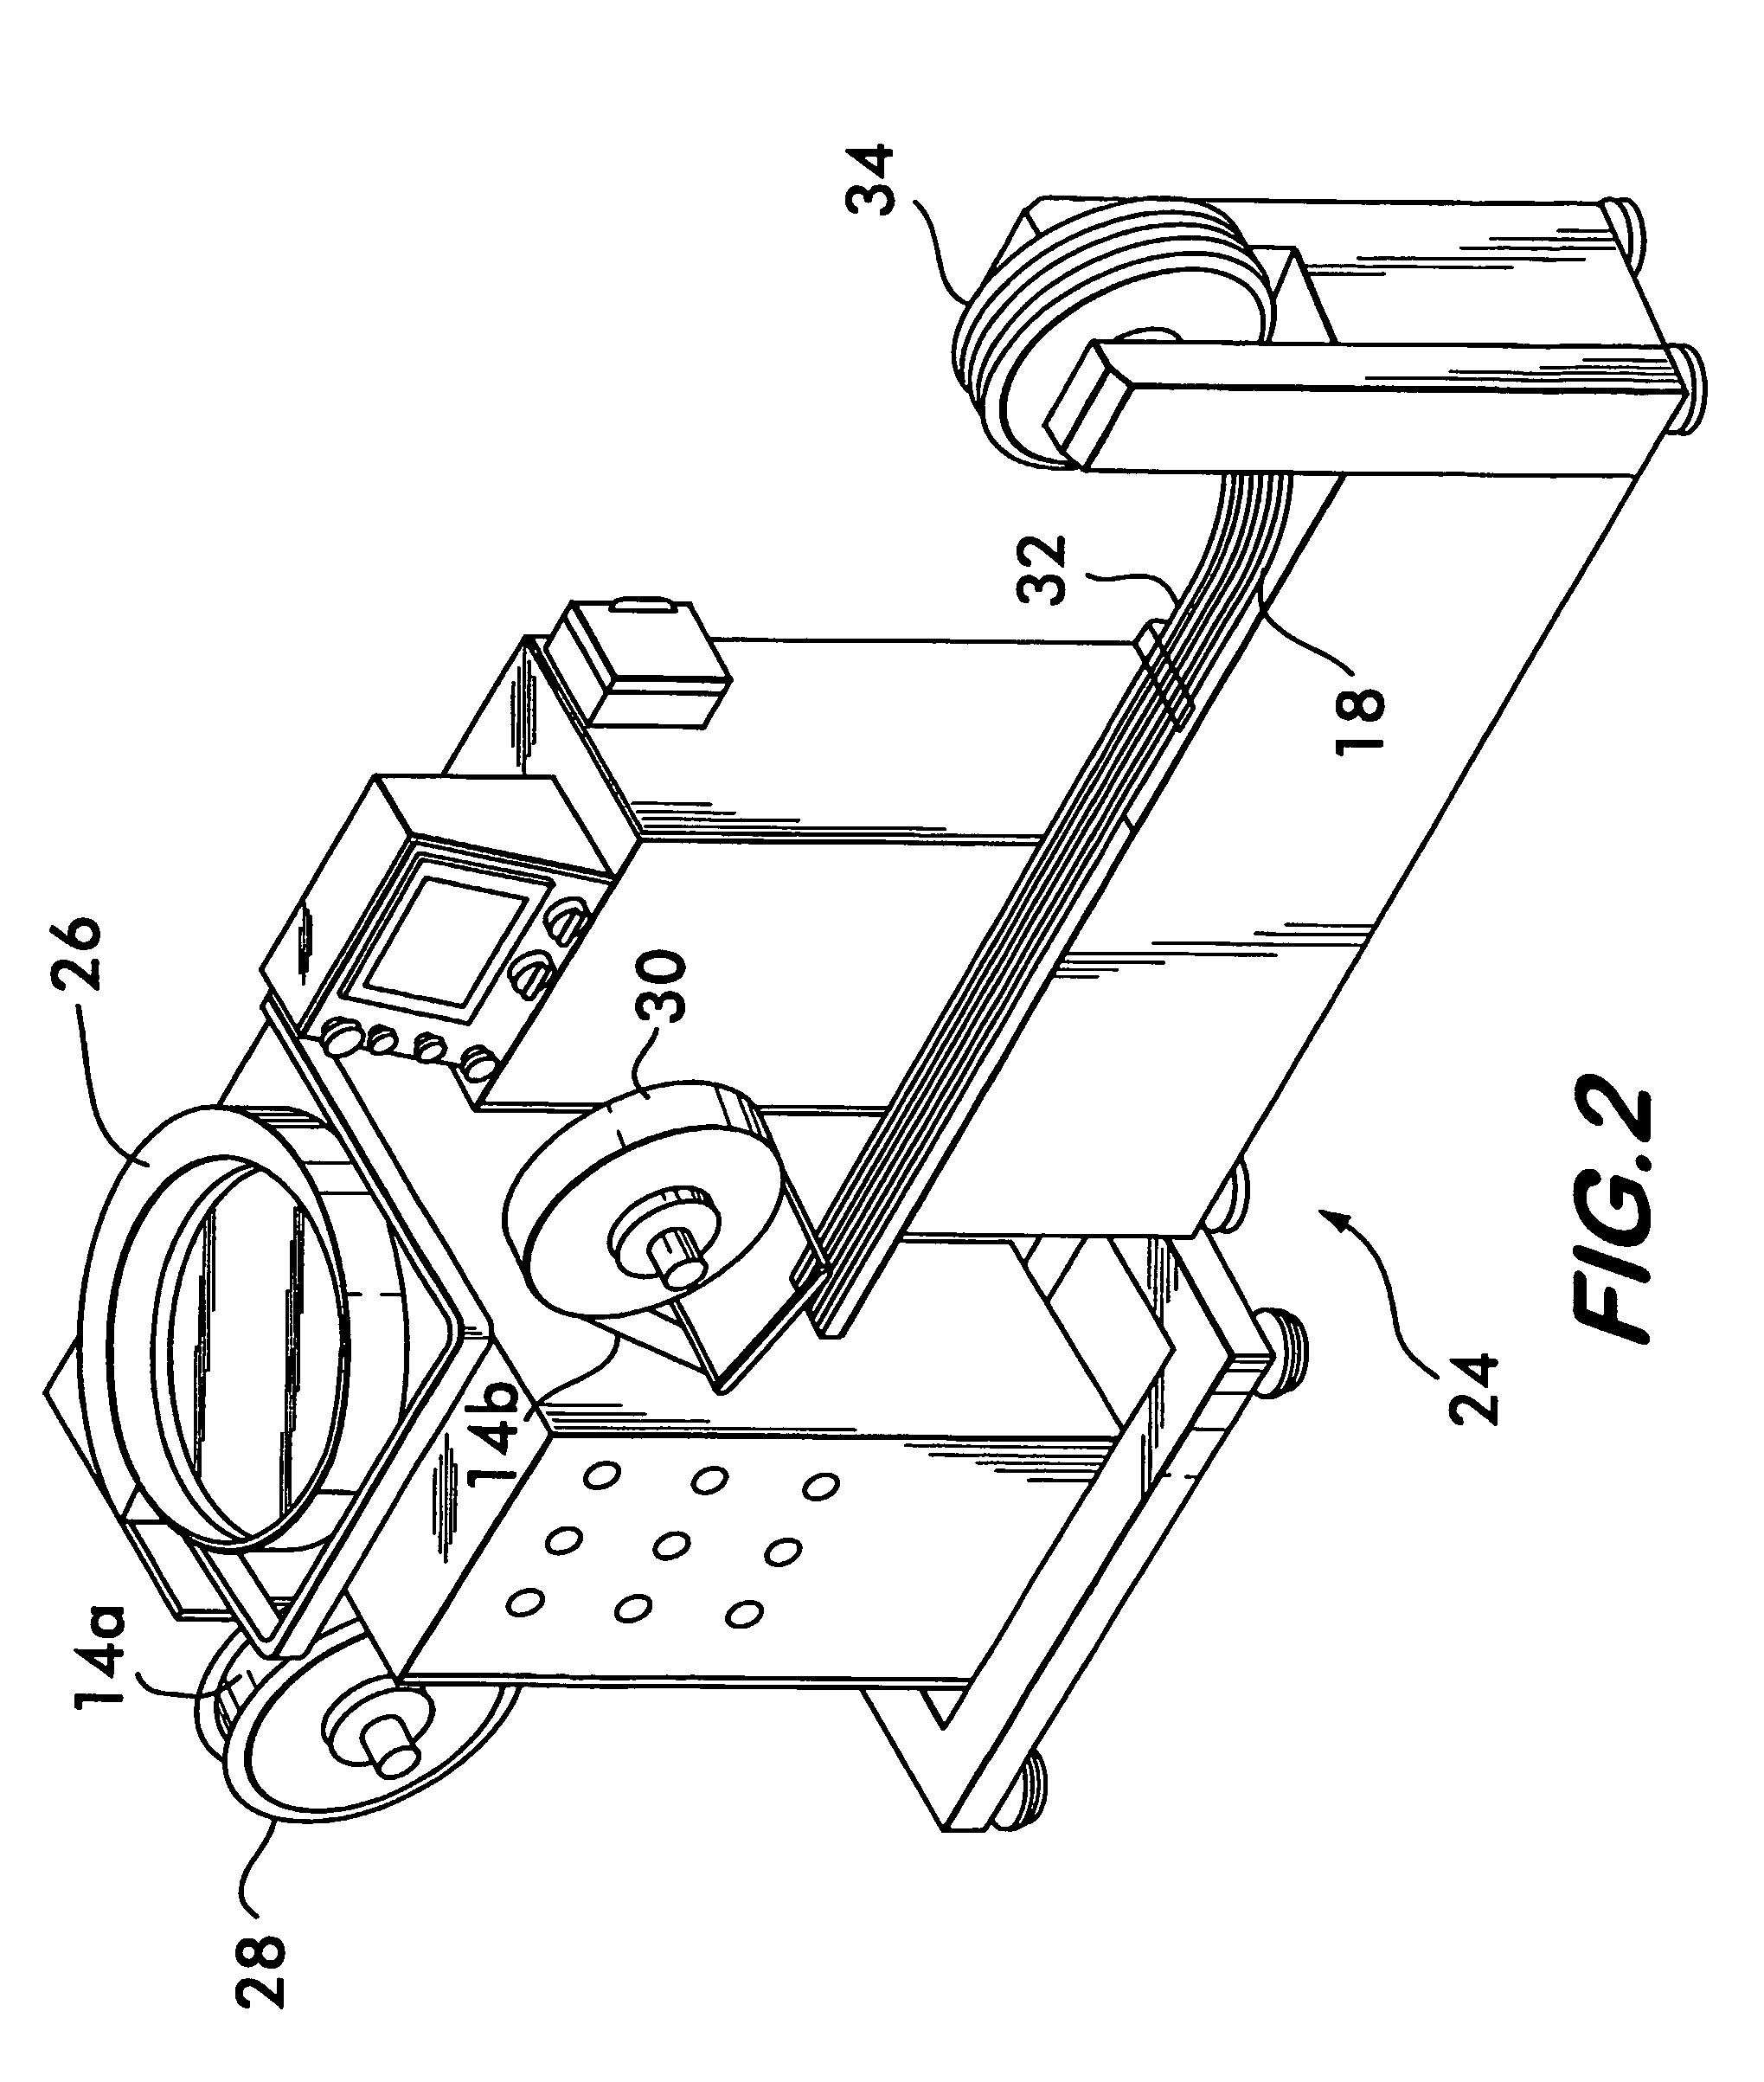 Process and machine for automated manufacture of gastro-retentive devices